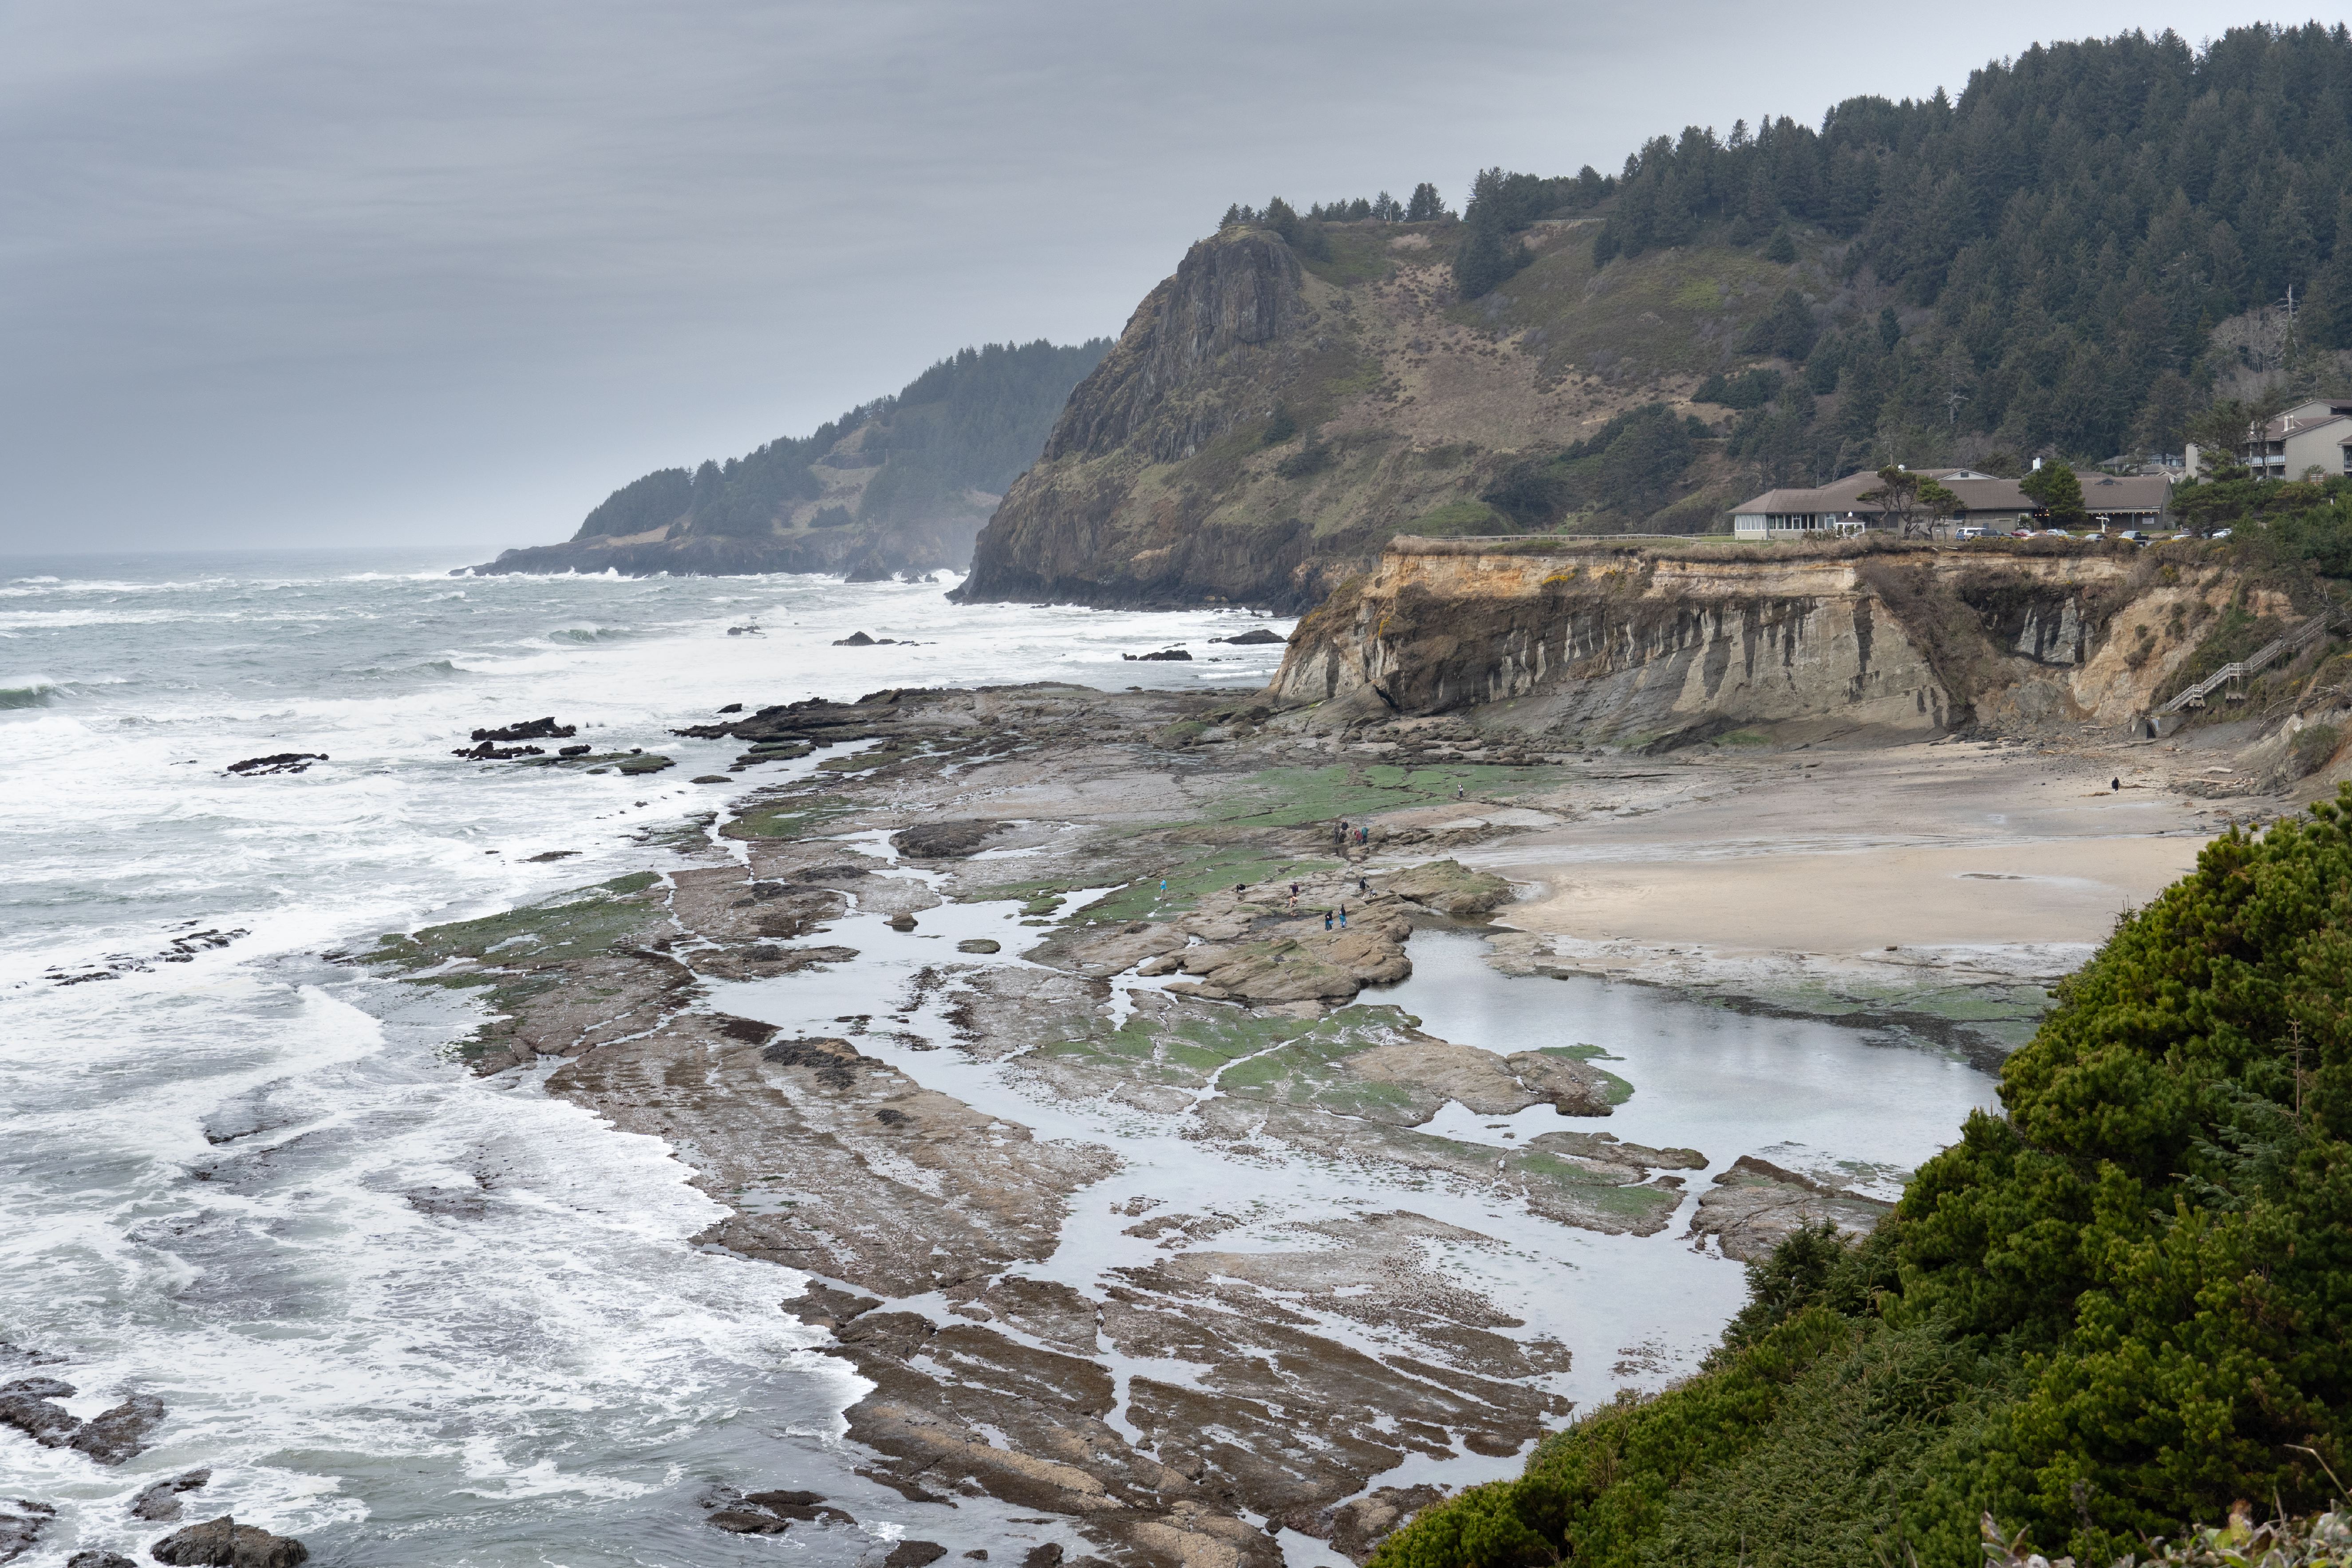 Wave-cut platform or bench and uplifted marine terrace with buildings. The marine terrace rests with angular unconformity on tilted sandstone of Miocene Astoria Formation, Otter Crest and Cape Foul weather, Oregon coast.